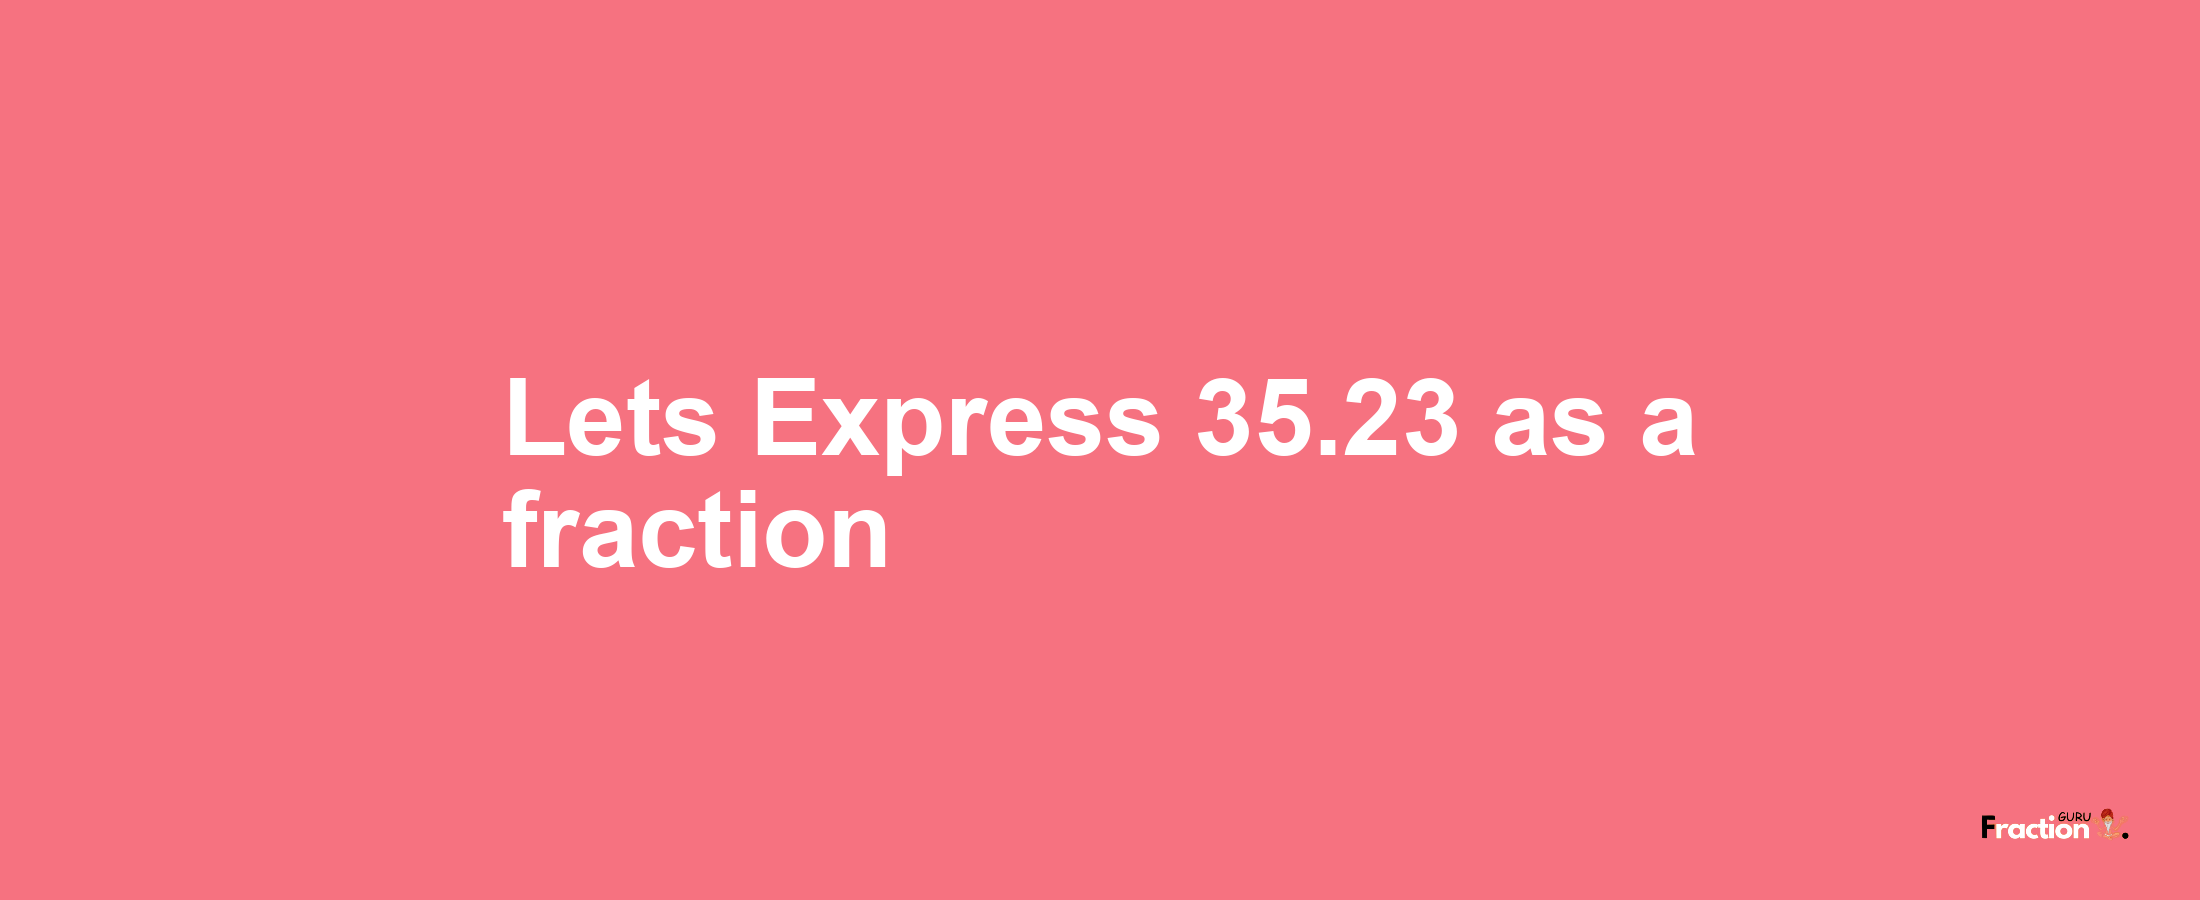 Lets Express 35.23 as afraction